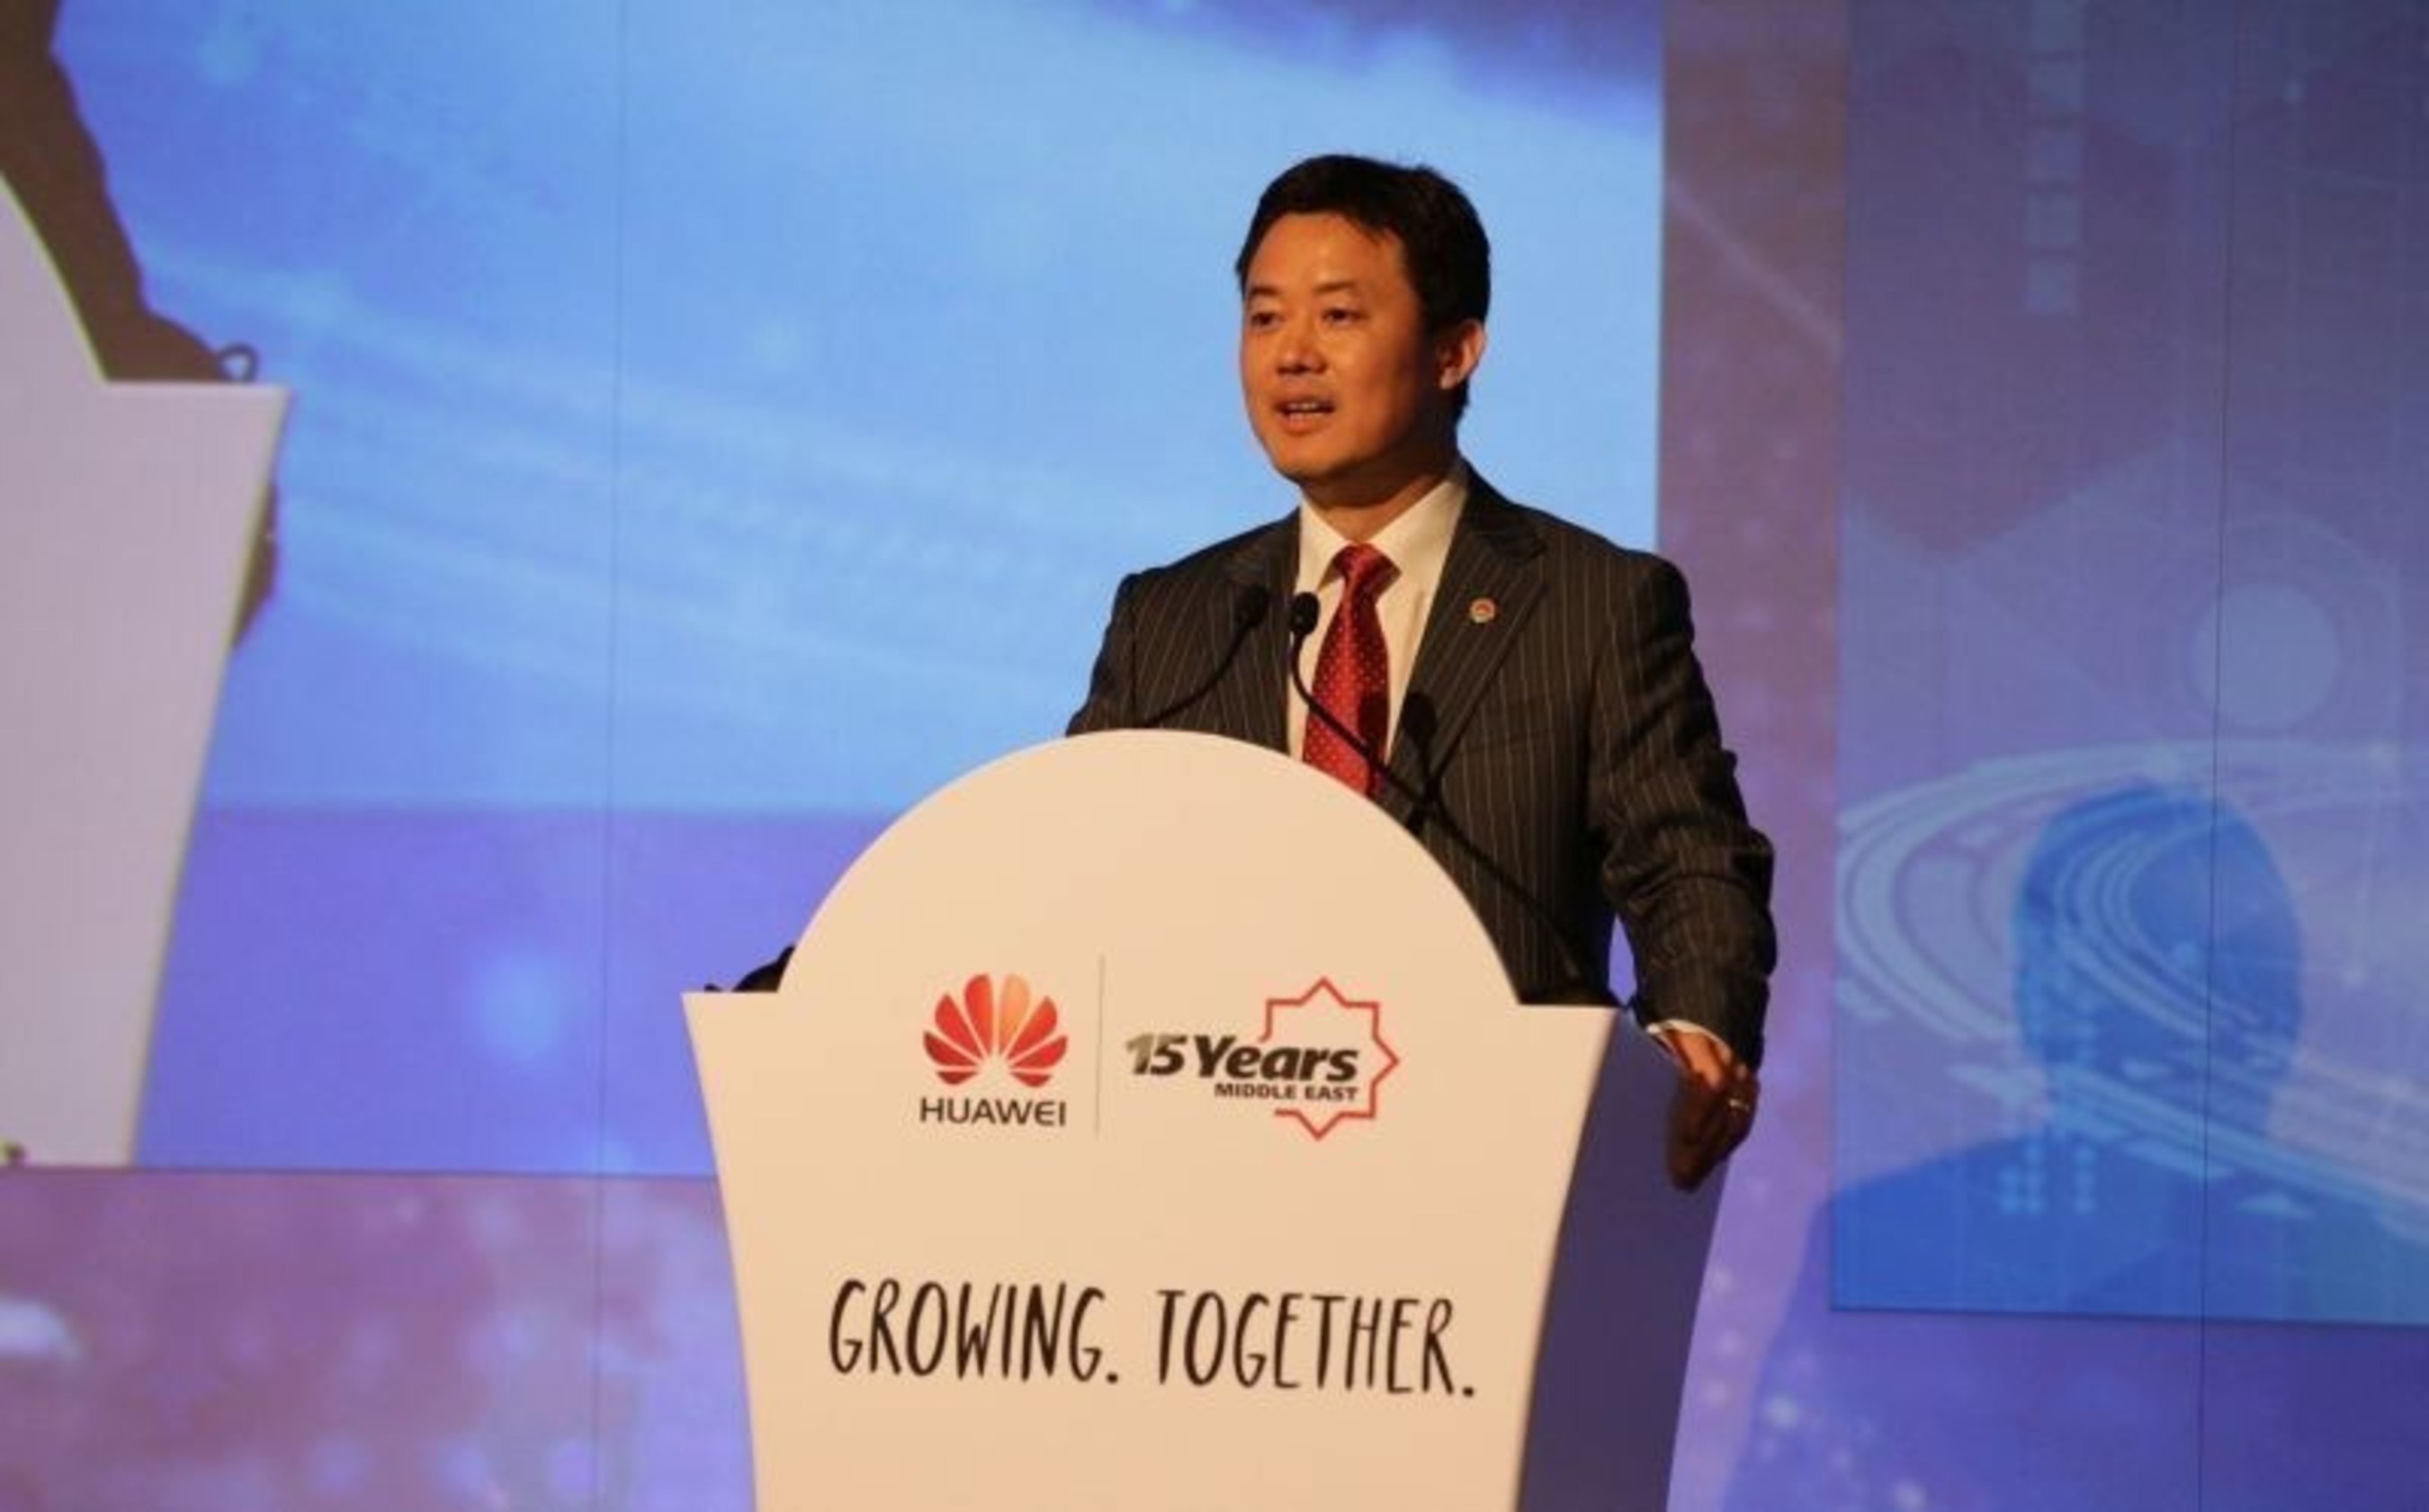 Charles Yang, President of Huawei Middle East (PRNewsFoto/Huawei) (PRNewsFoto/Huawei)